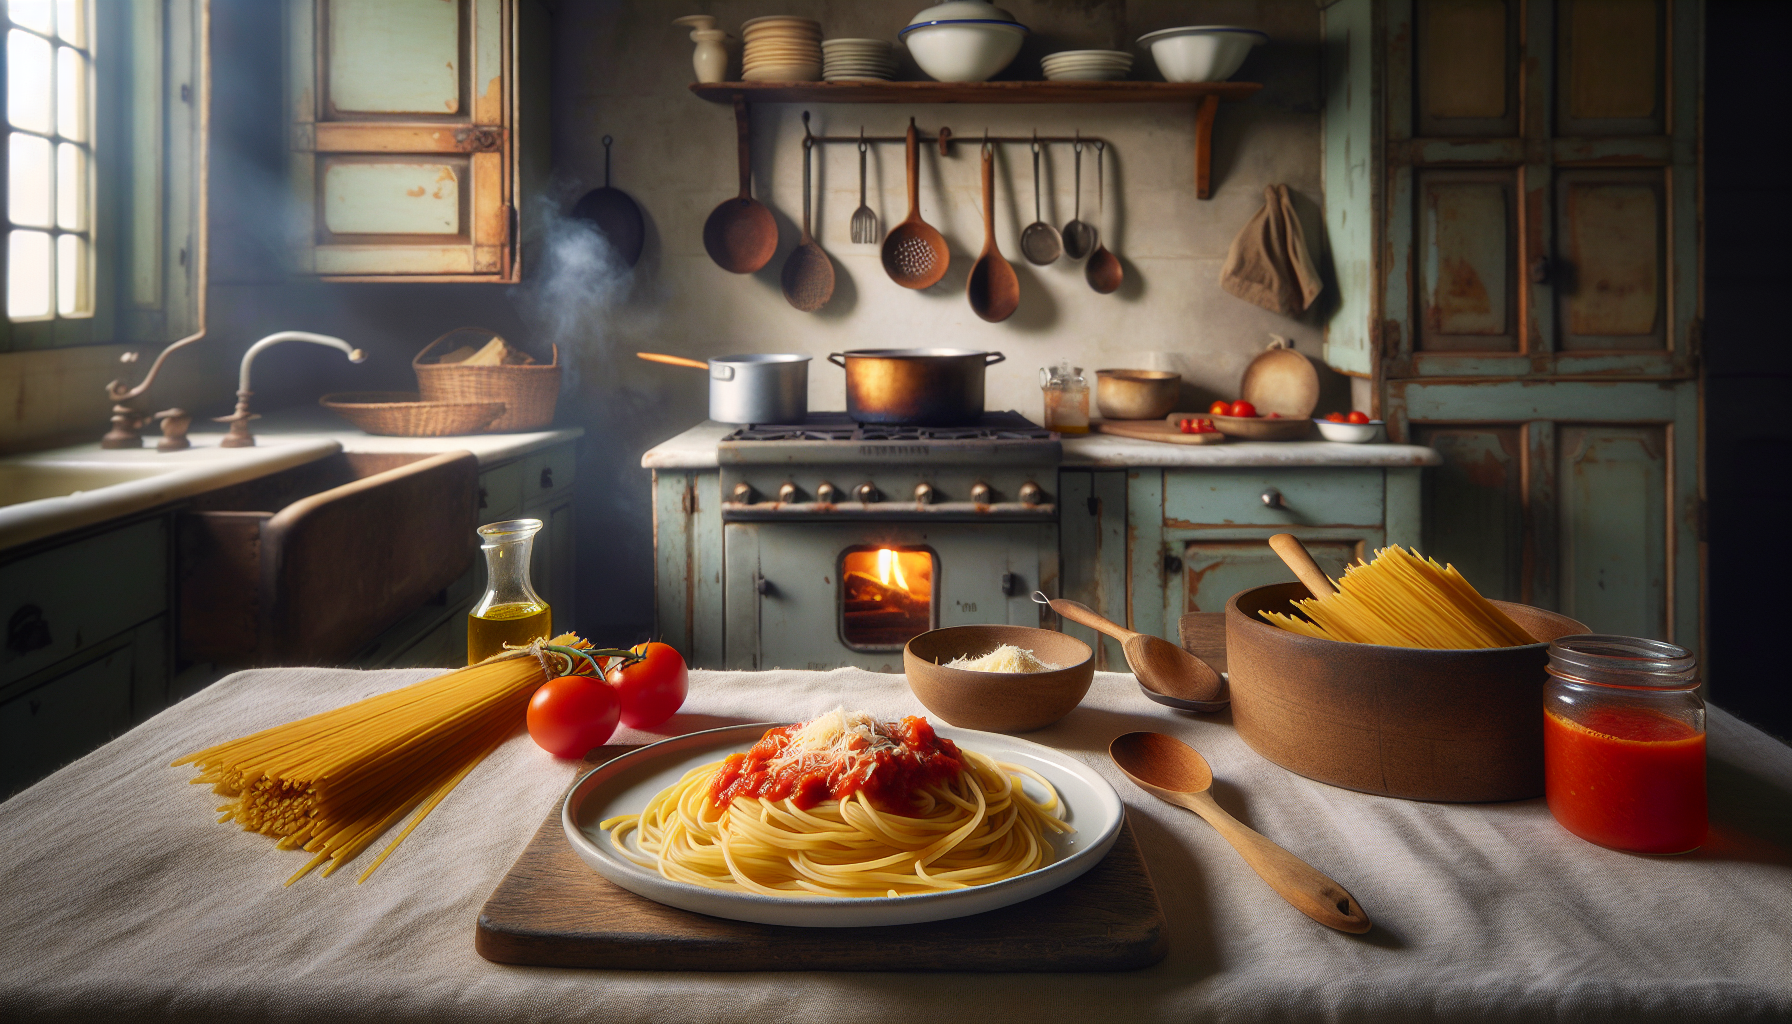 Can You Recommend A Speedy Italian Pasta Recipe For A Busy Day?